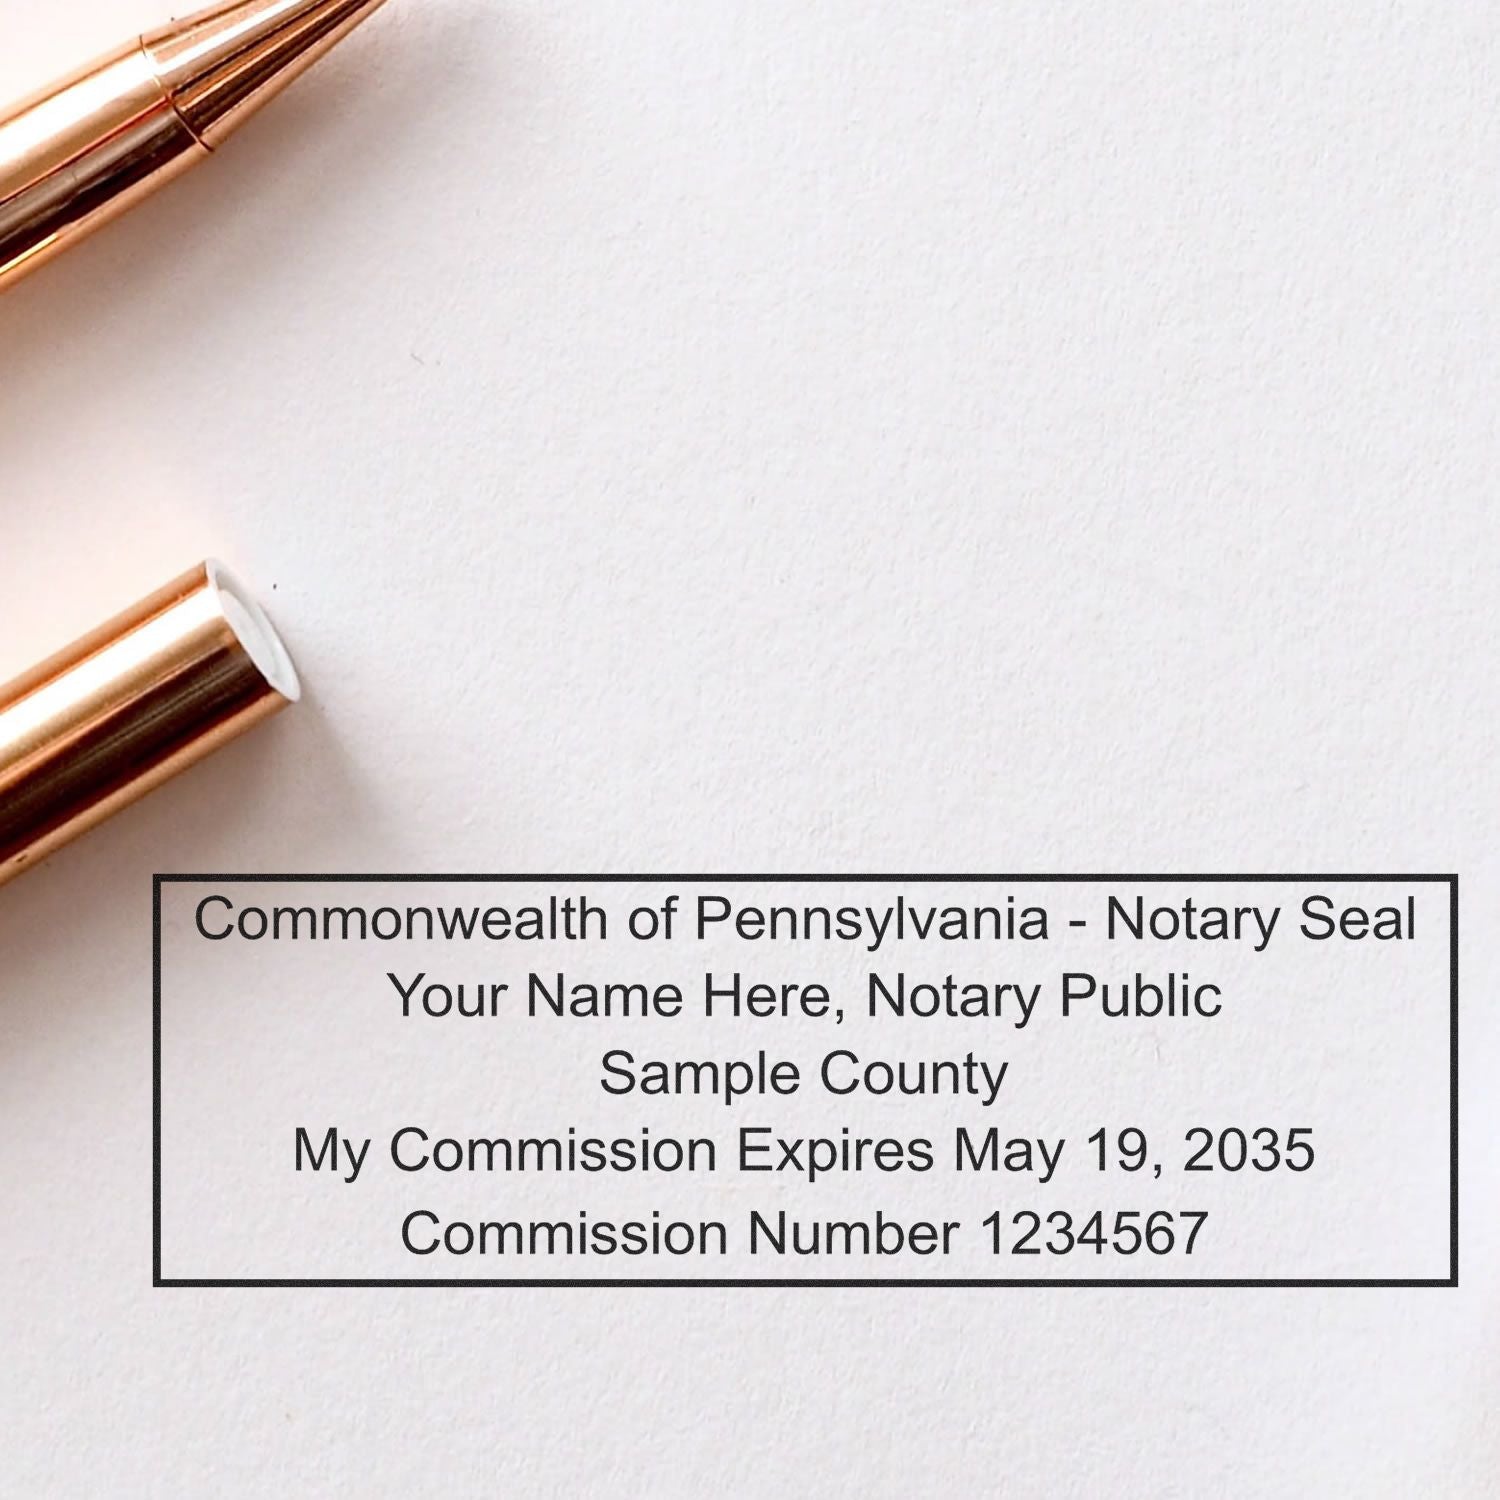 The main image for the Wooden Handle Pennsylvania Rectangular Notary Public Stamp depicting a sample of the imprint and electronic files